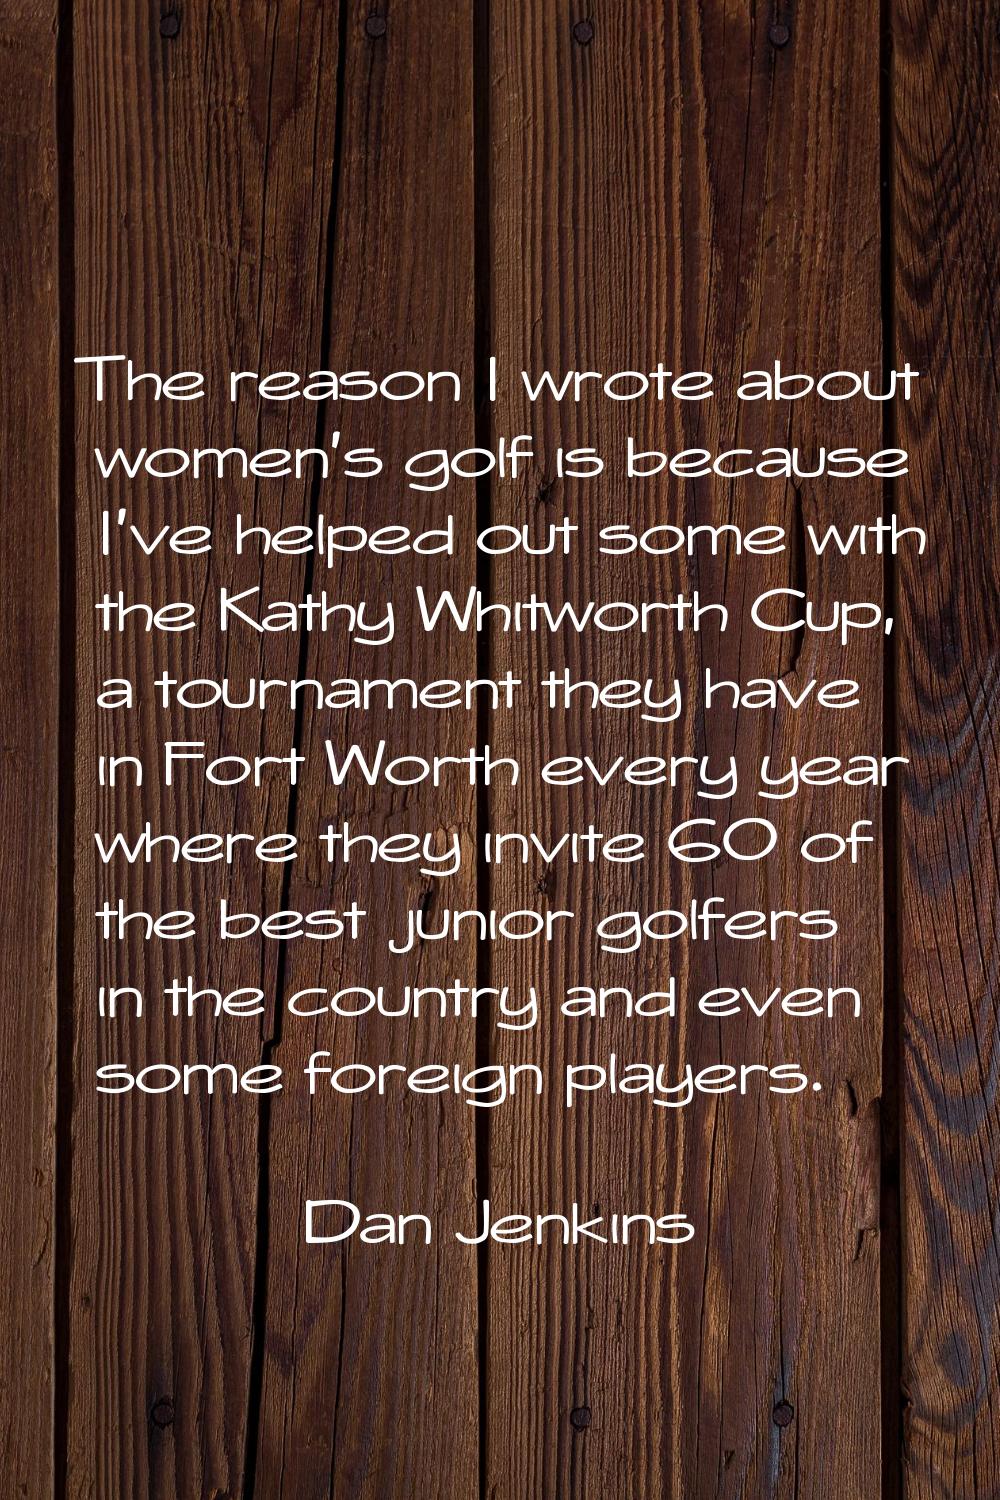 The reason I wrote about women's golf is because I've helped out some with the Kathy Whitworth Cup,